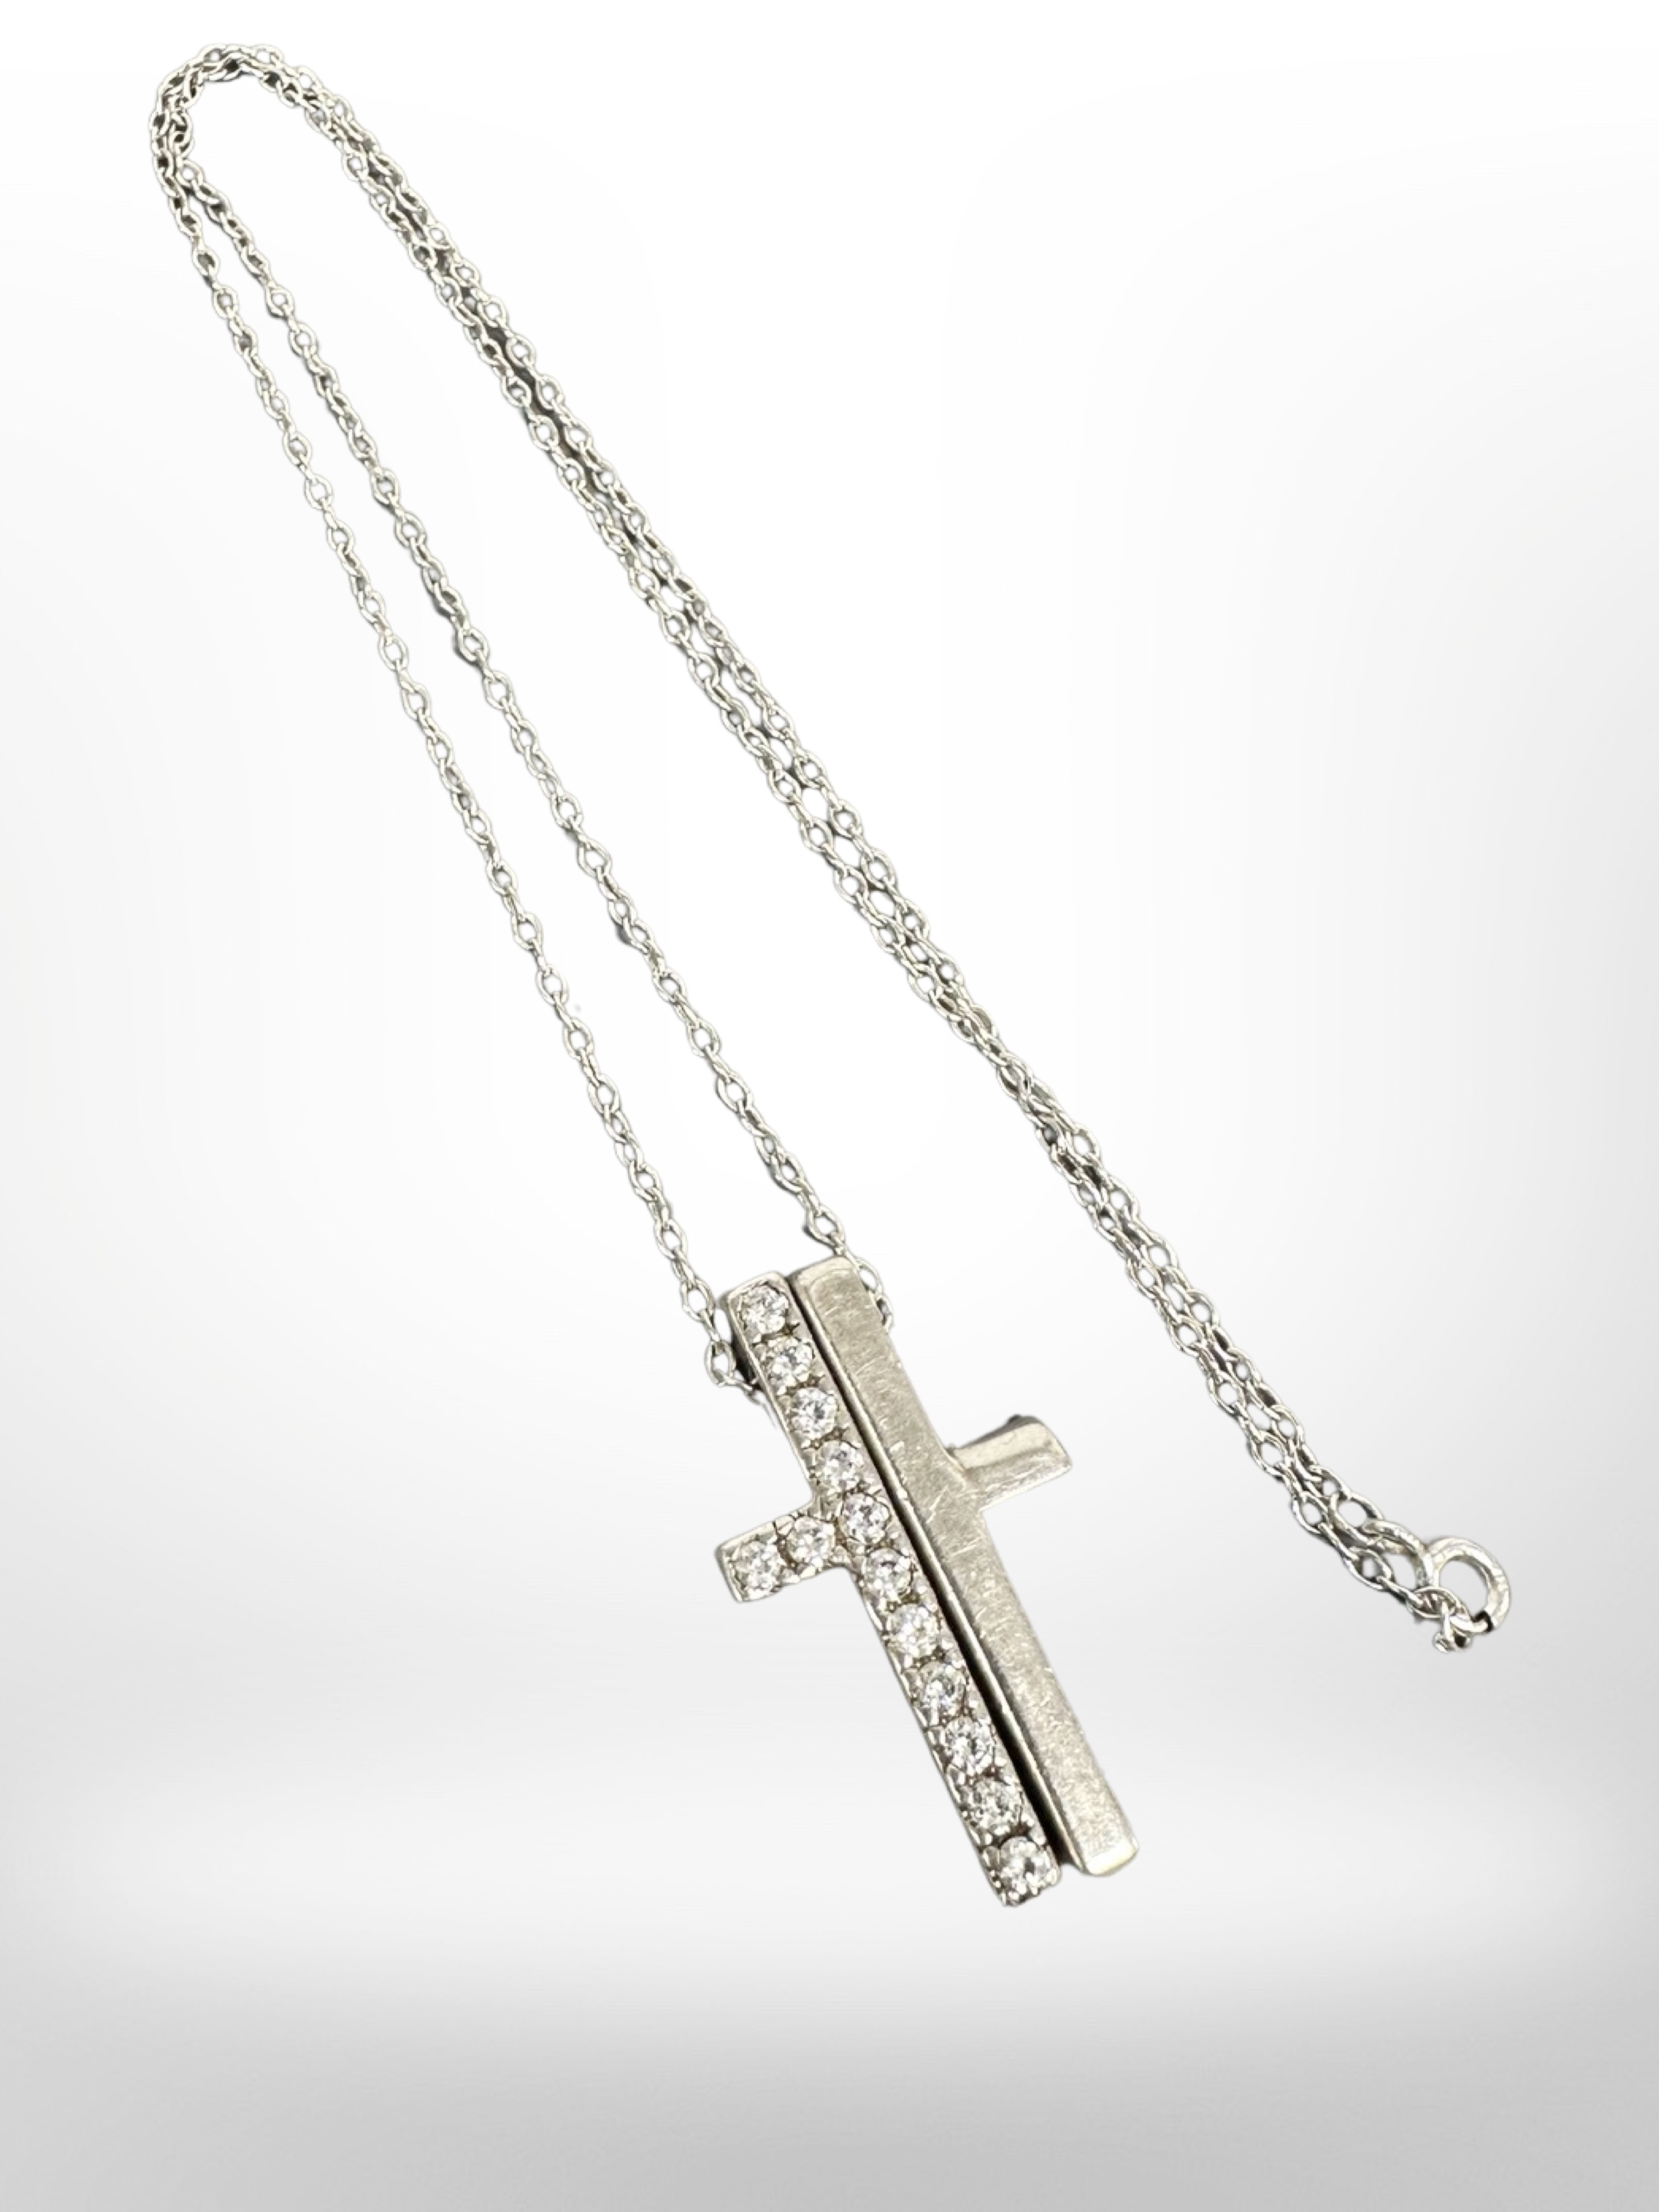 A split silver crucifix on chain, marked Gucci.